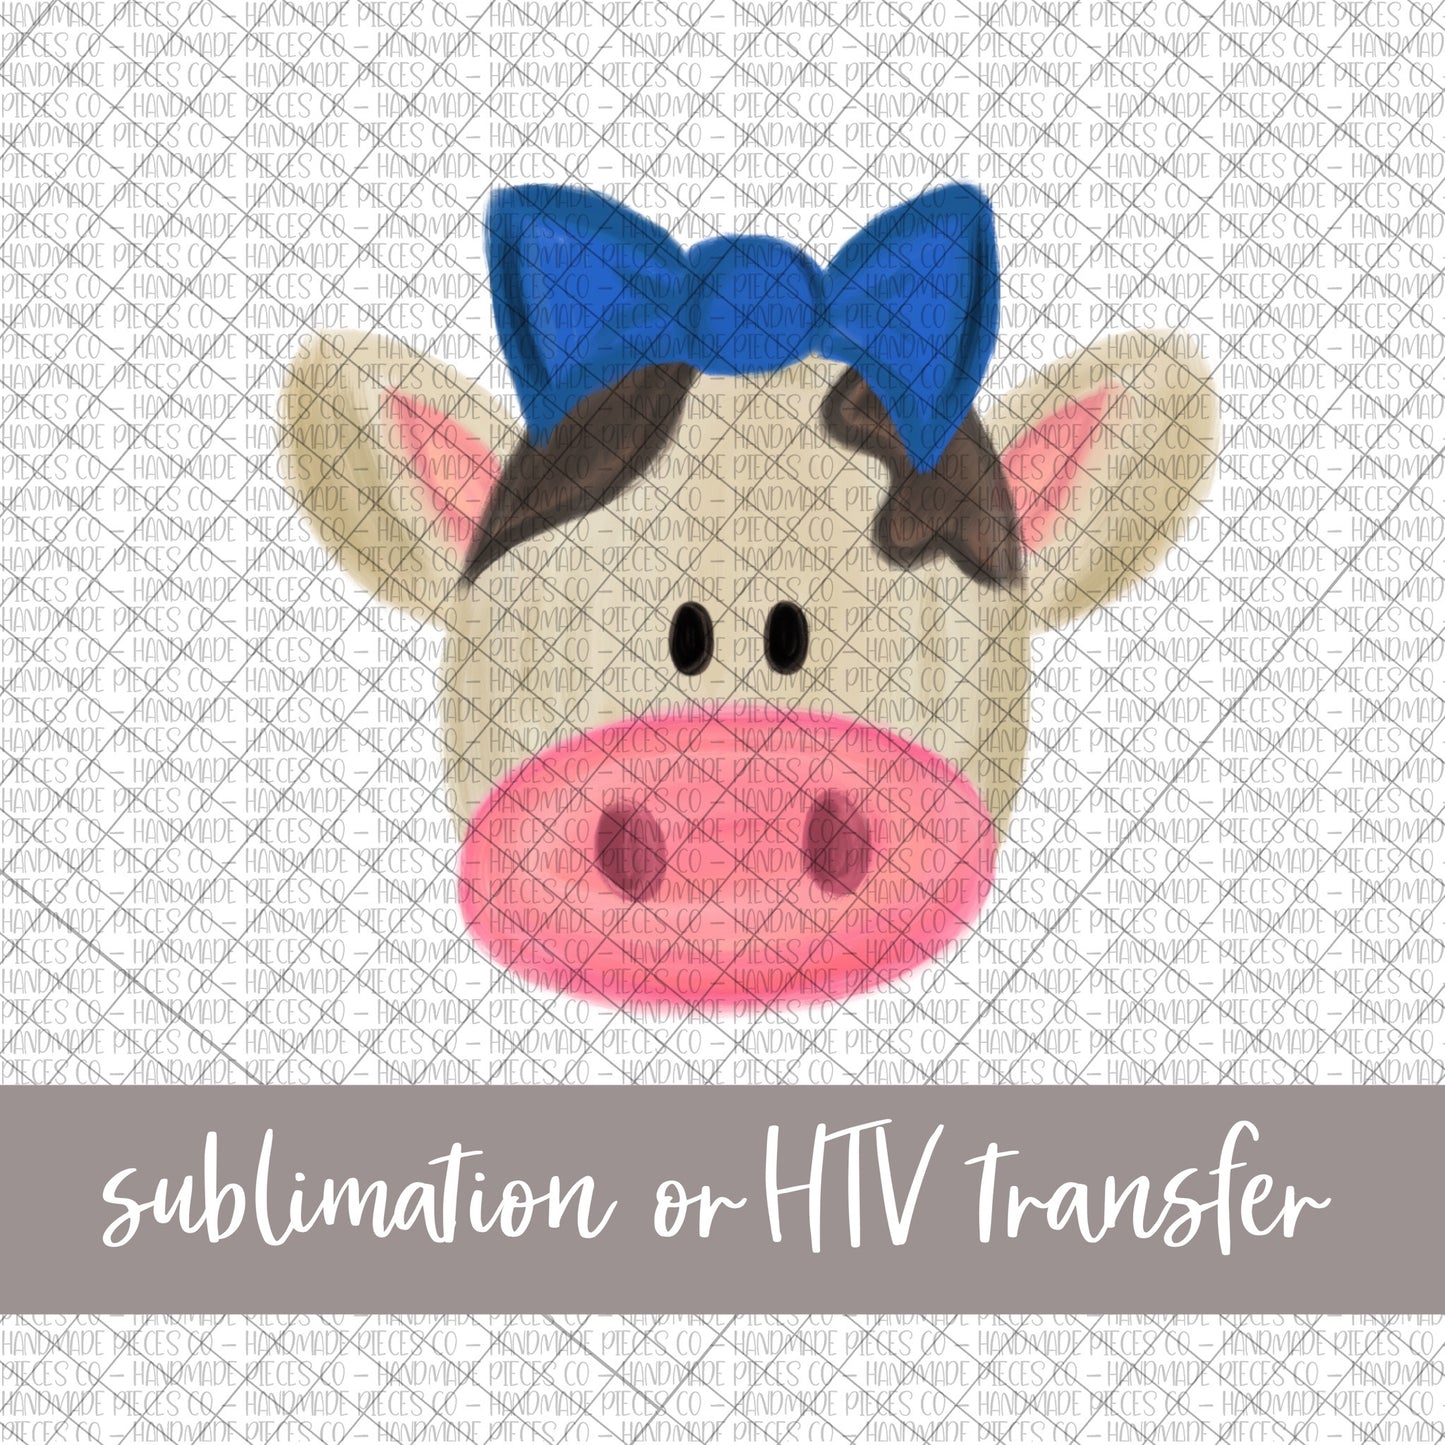 Cow, Blue Bow - Sublimation or HTV Transfer